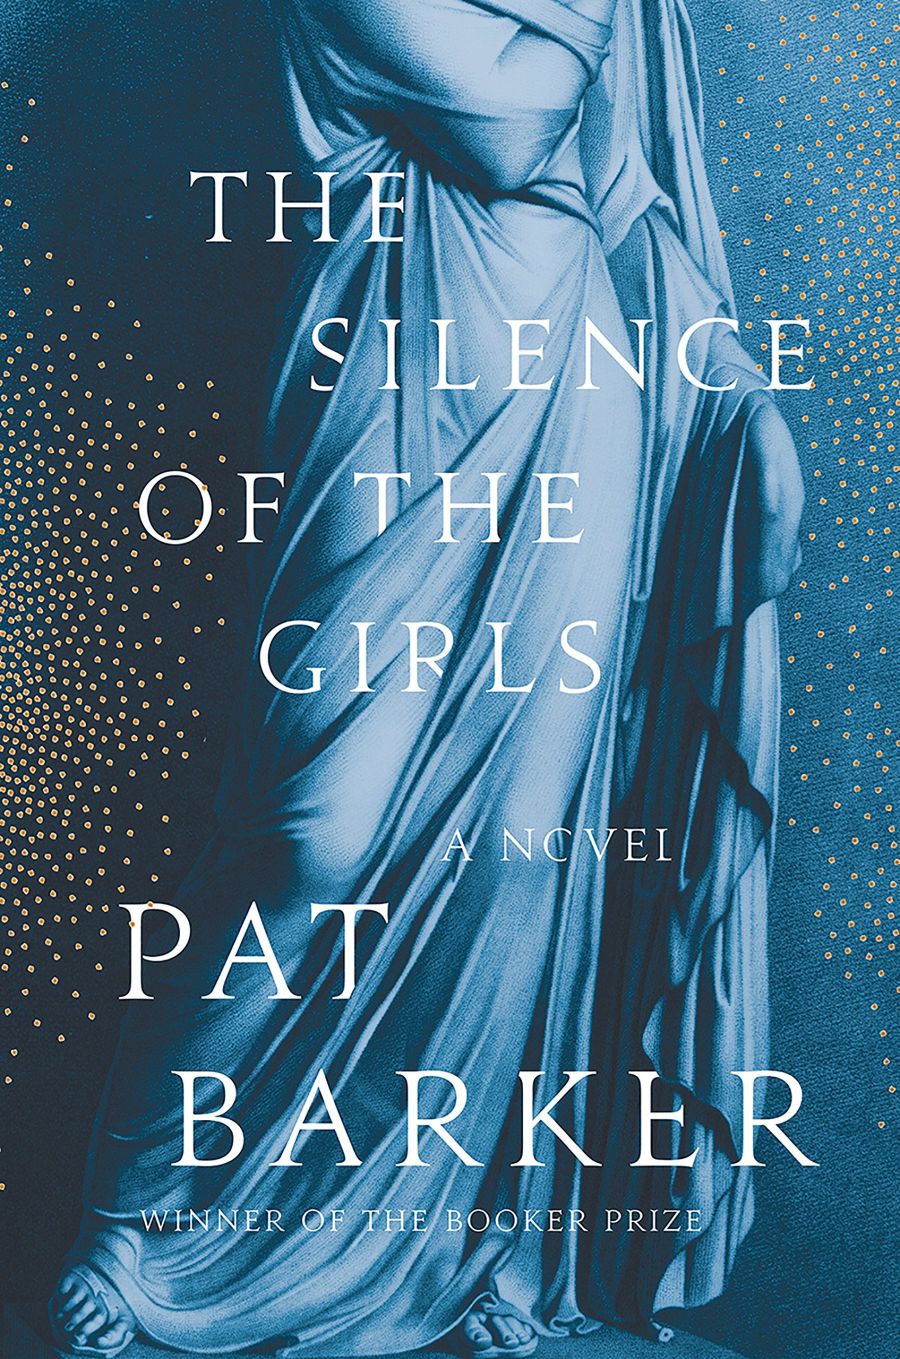 book cover of The Silence of the Girls, by Pat Barker.